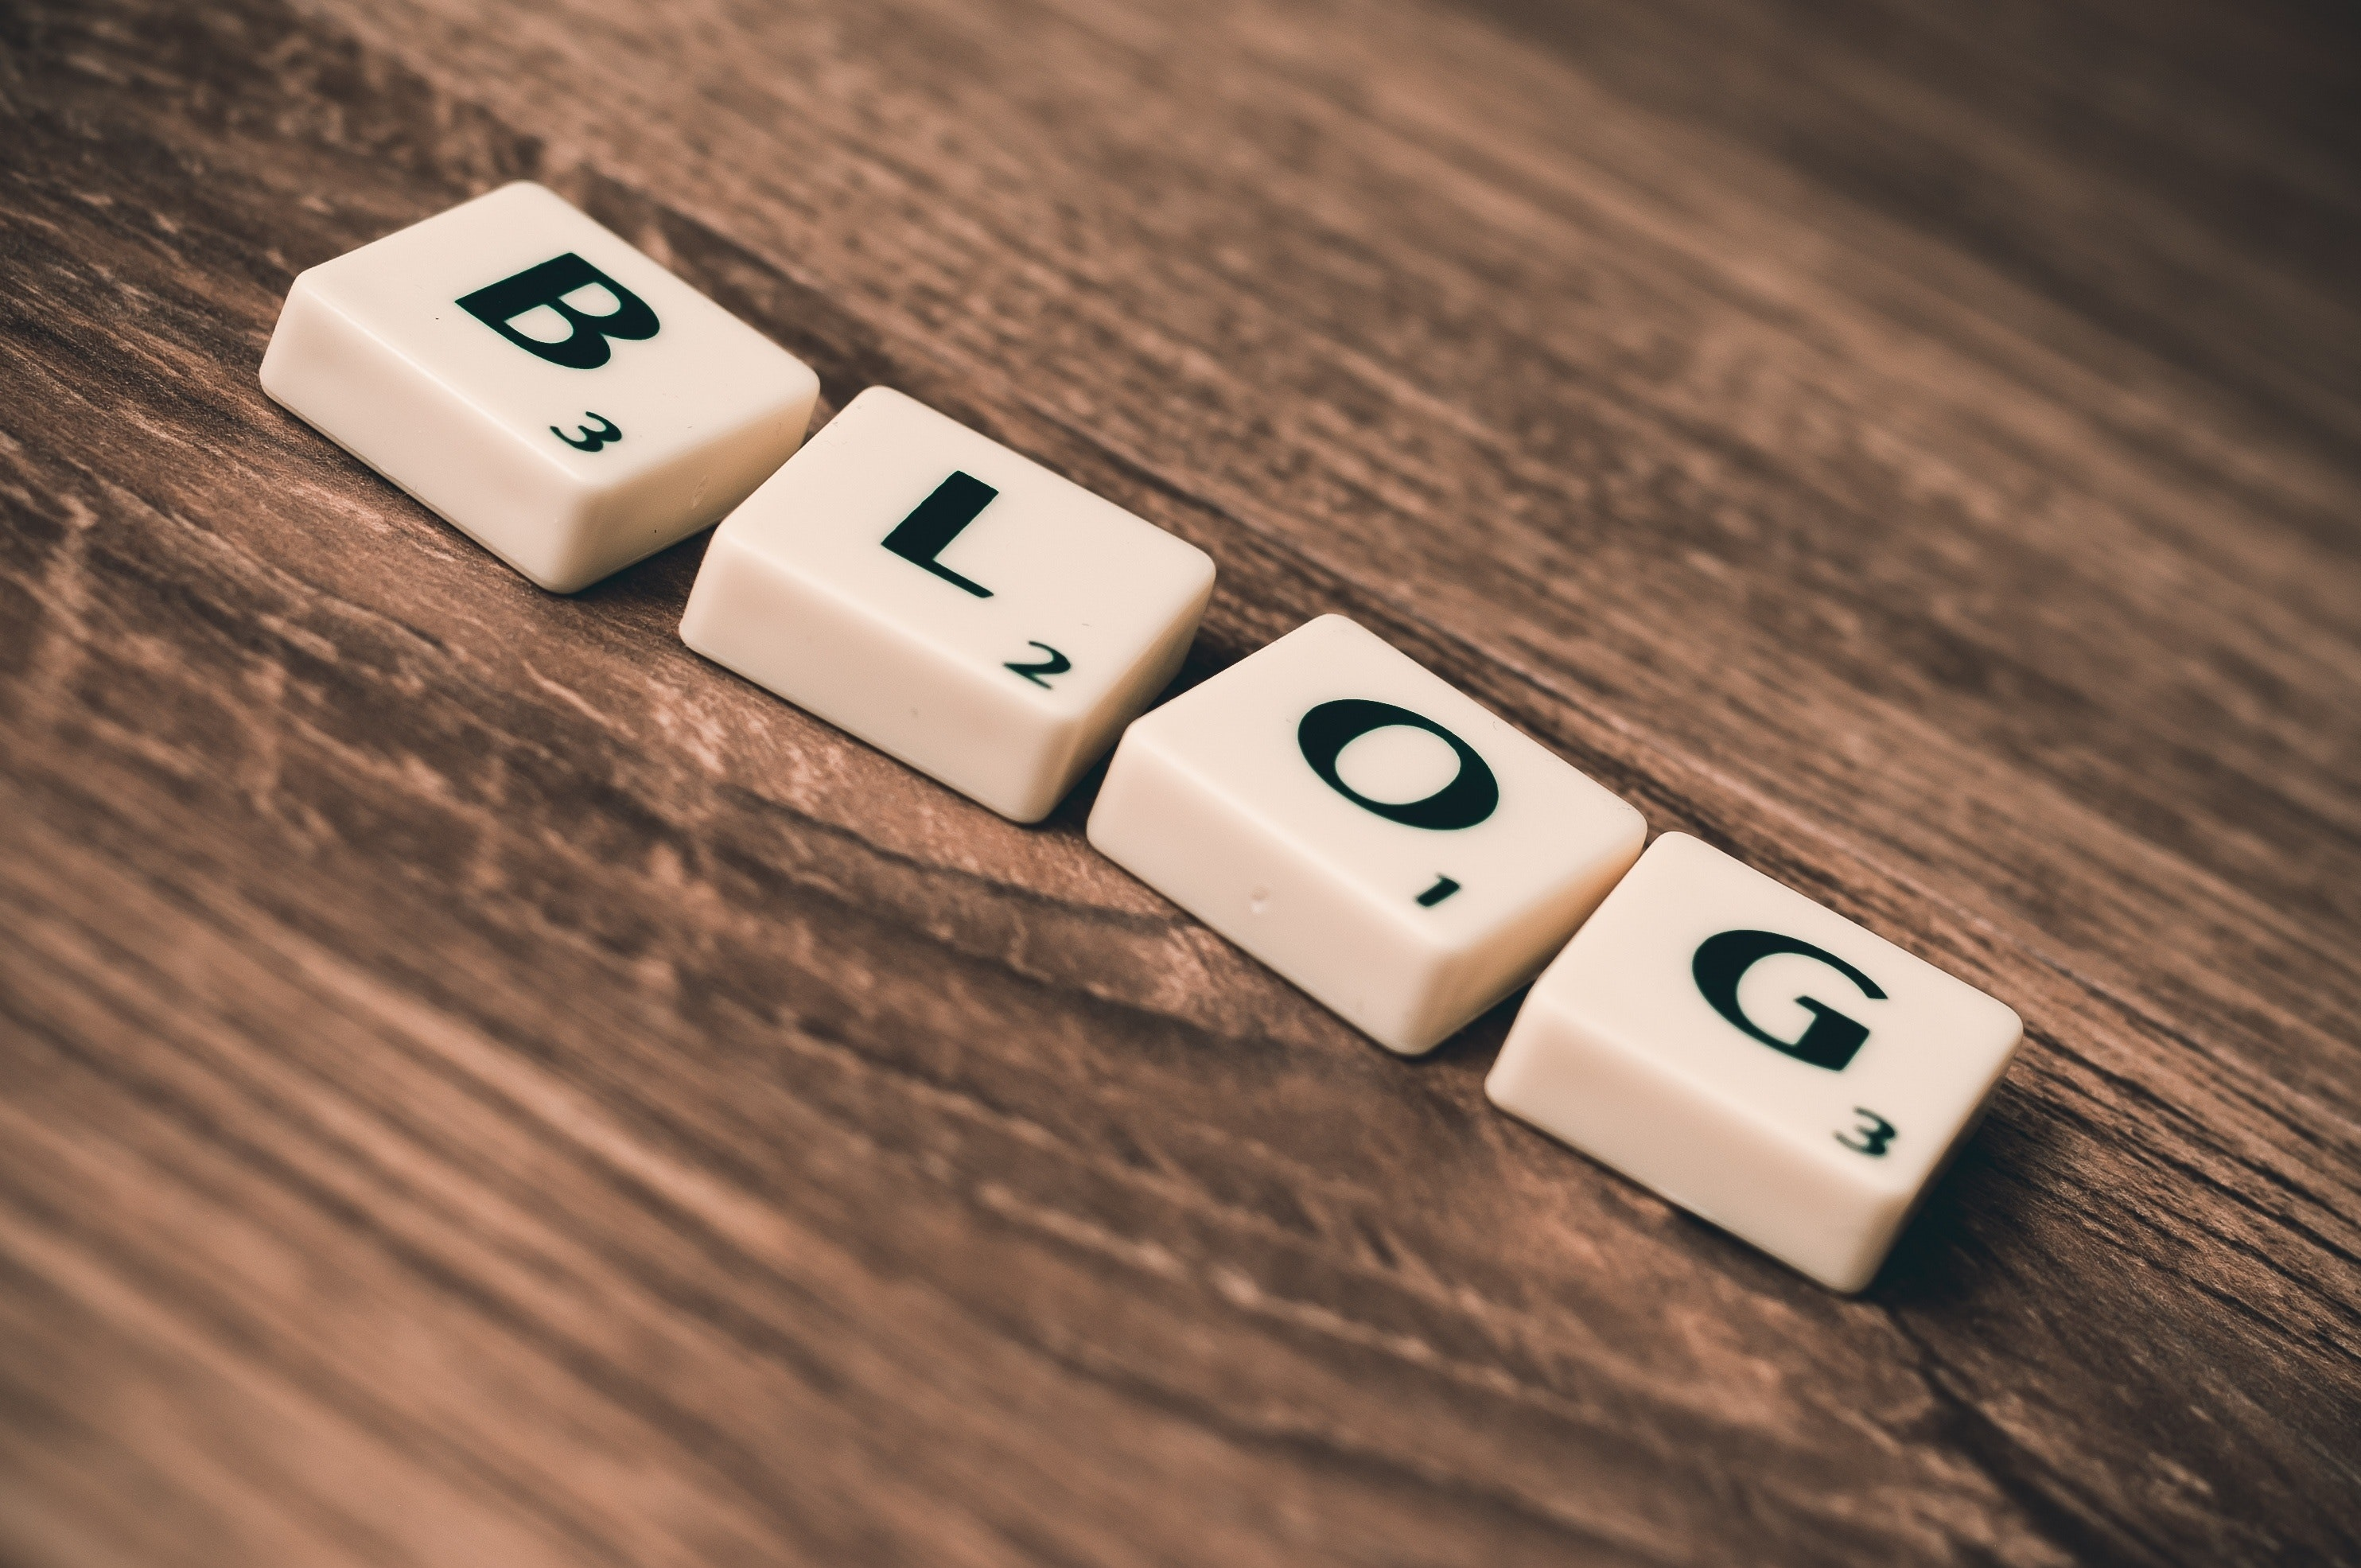 f5620fc1 6c43 43d7 9b03 668a352f51a7 Ranking Articles Ever Wondered How to Start a Blog? Here is a Complete Guide to Creating & Managing Your Own Blog Space